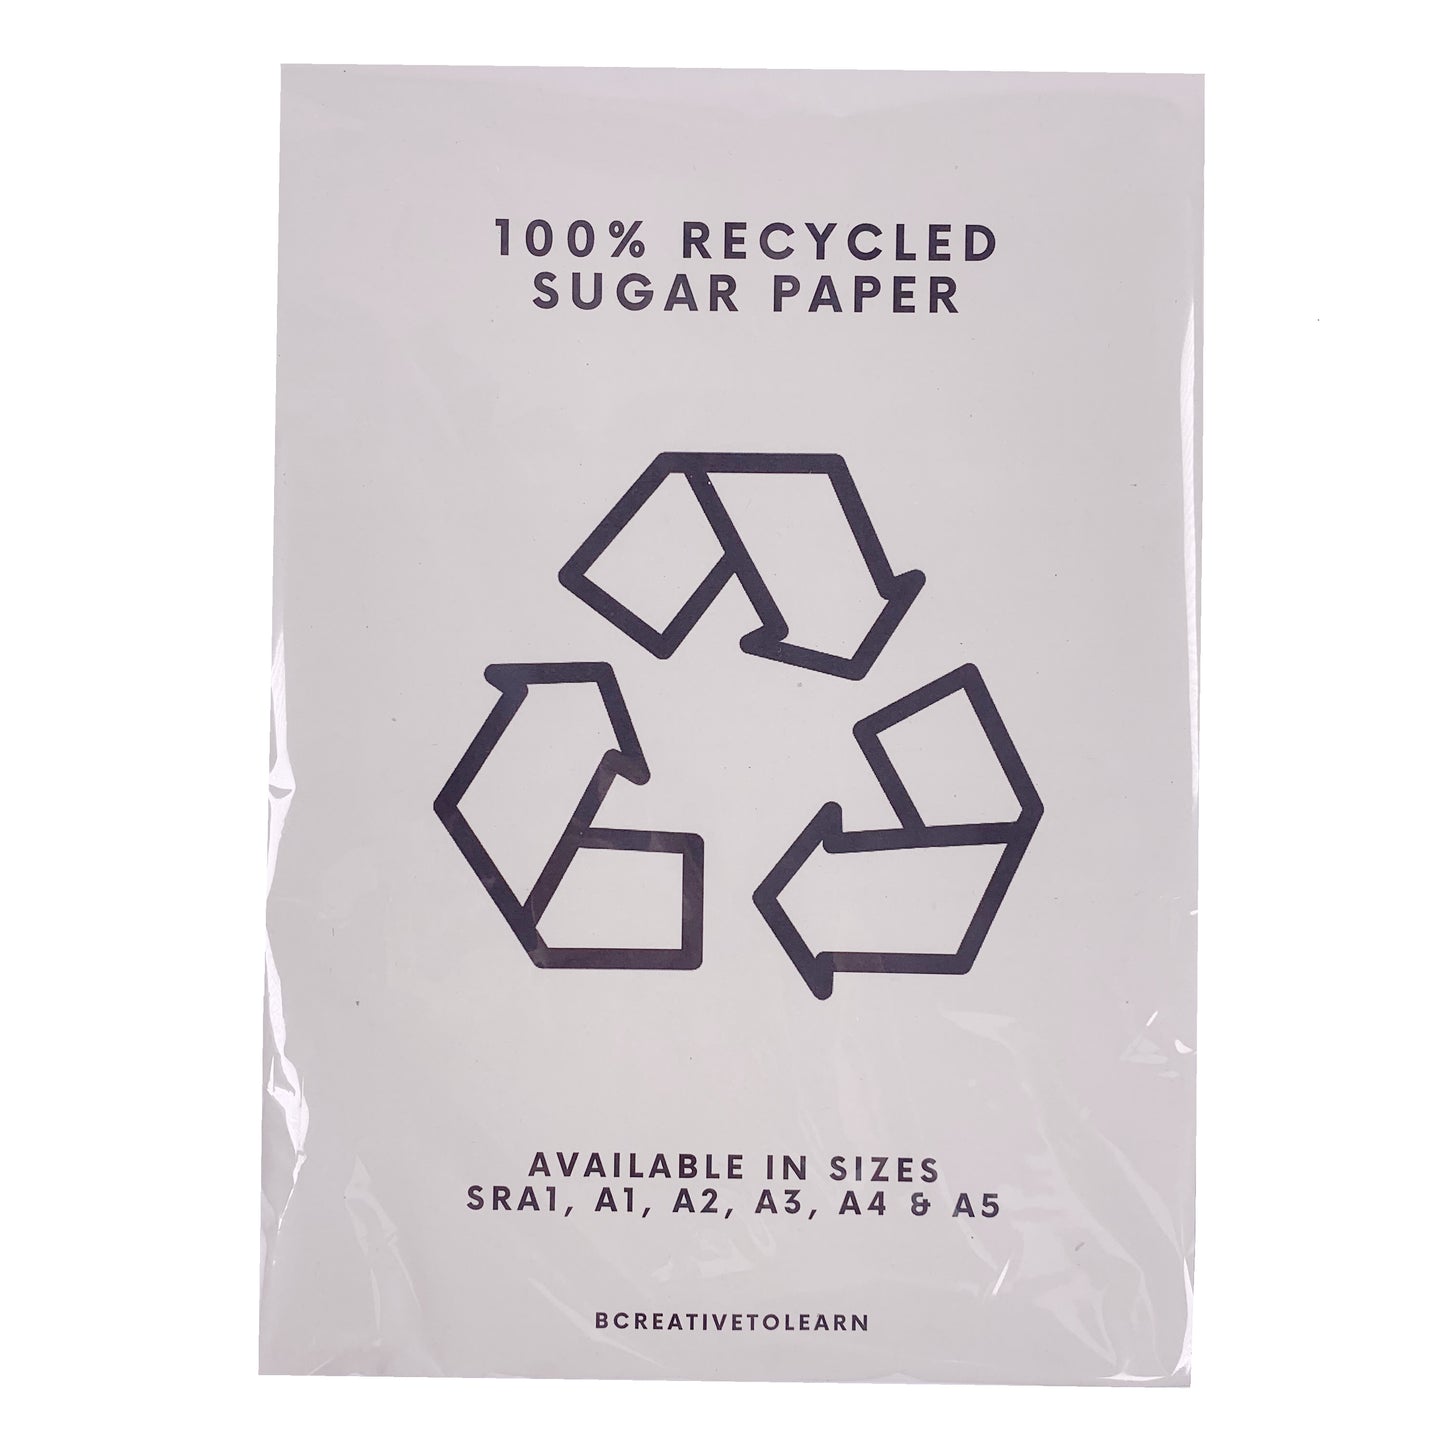 A1 Recycled White Sugar Paper 100gsm Choose Quantity